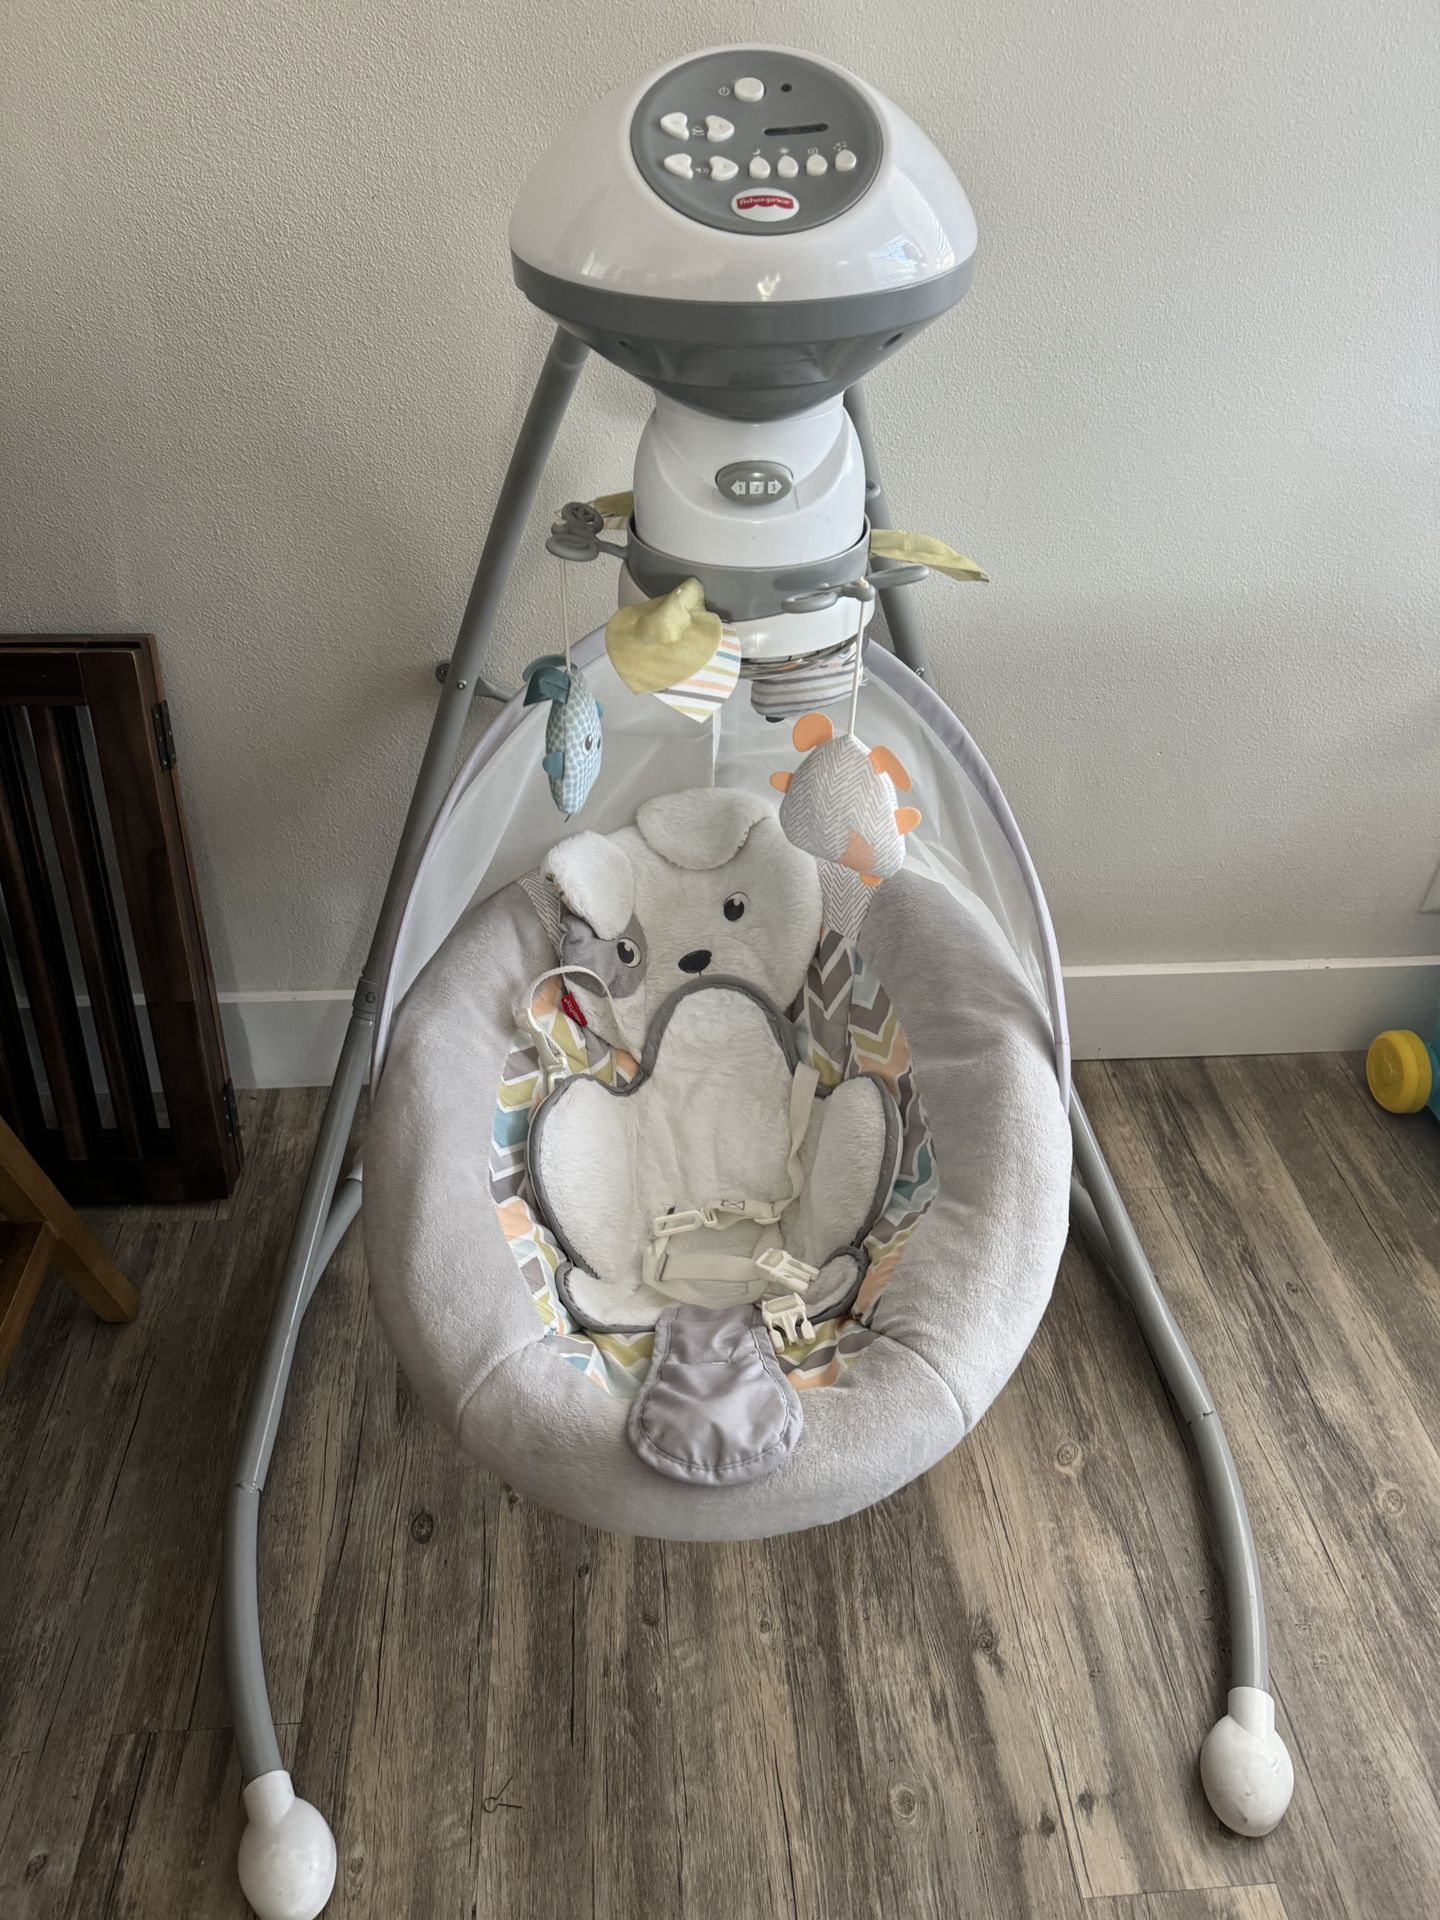 Fisher Price Puppy Swing